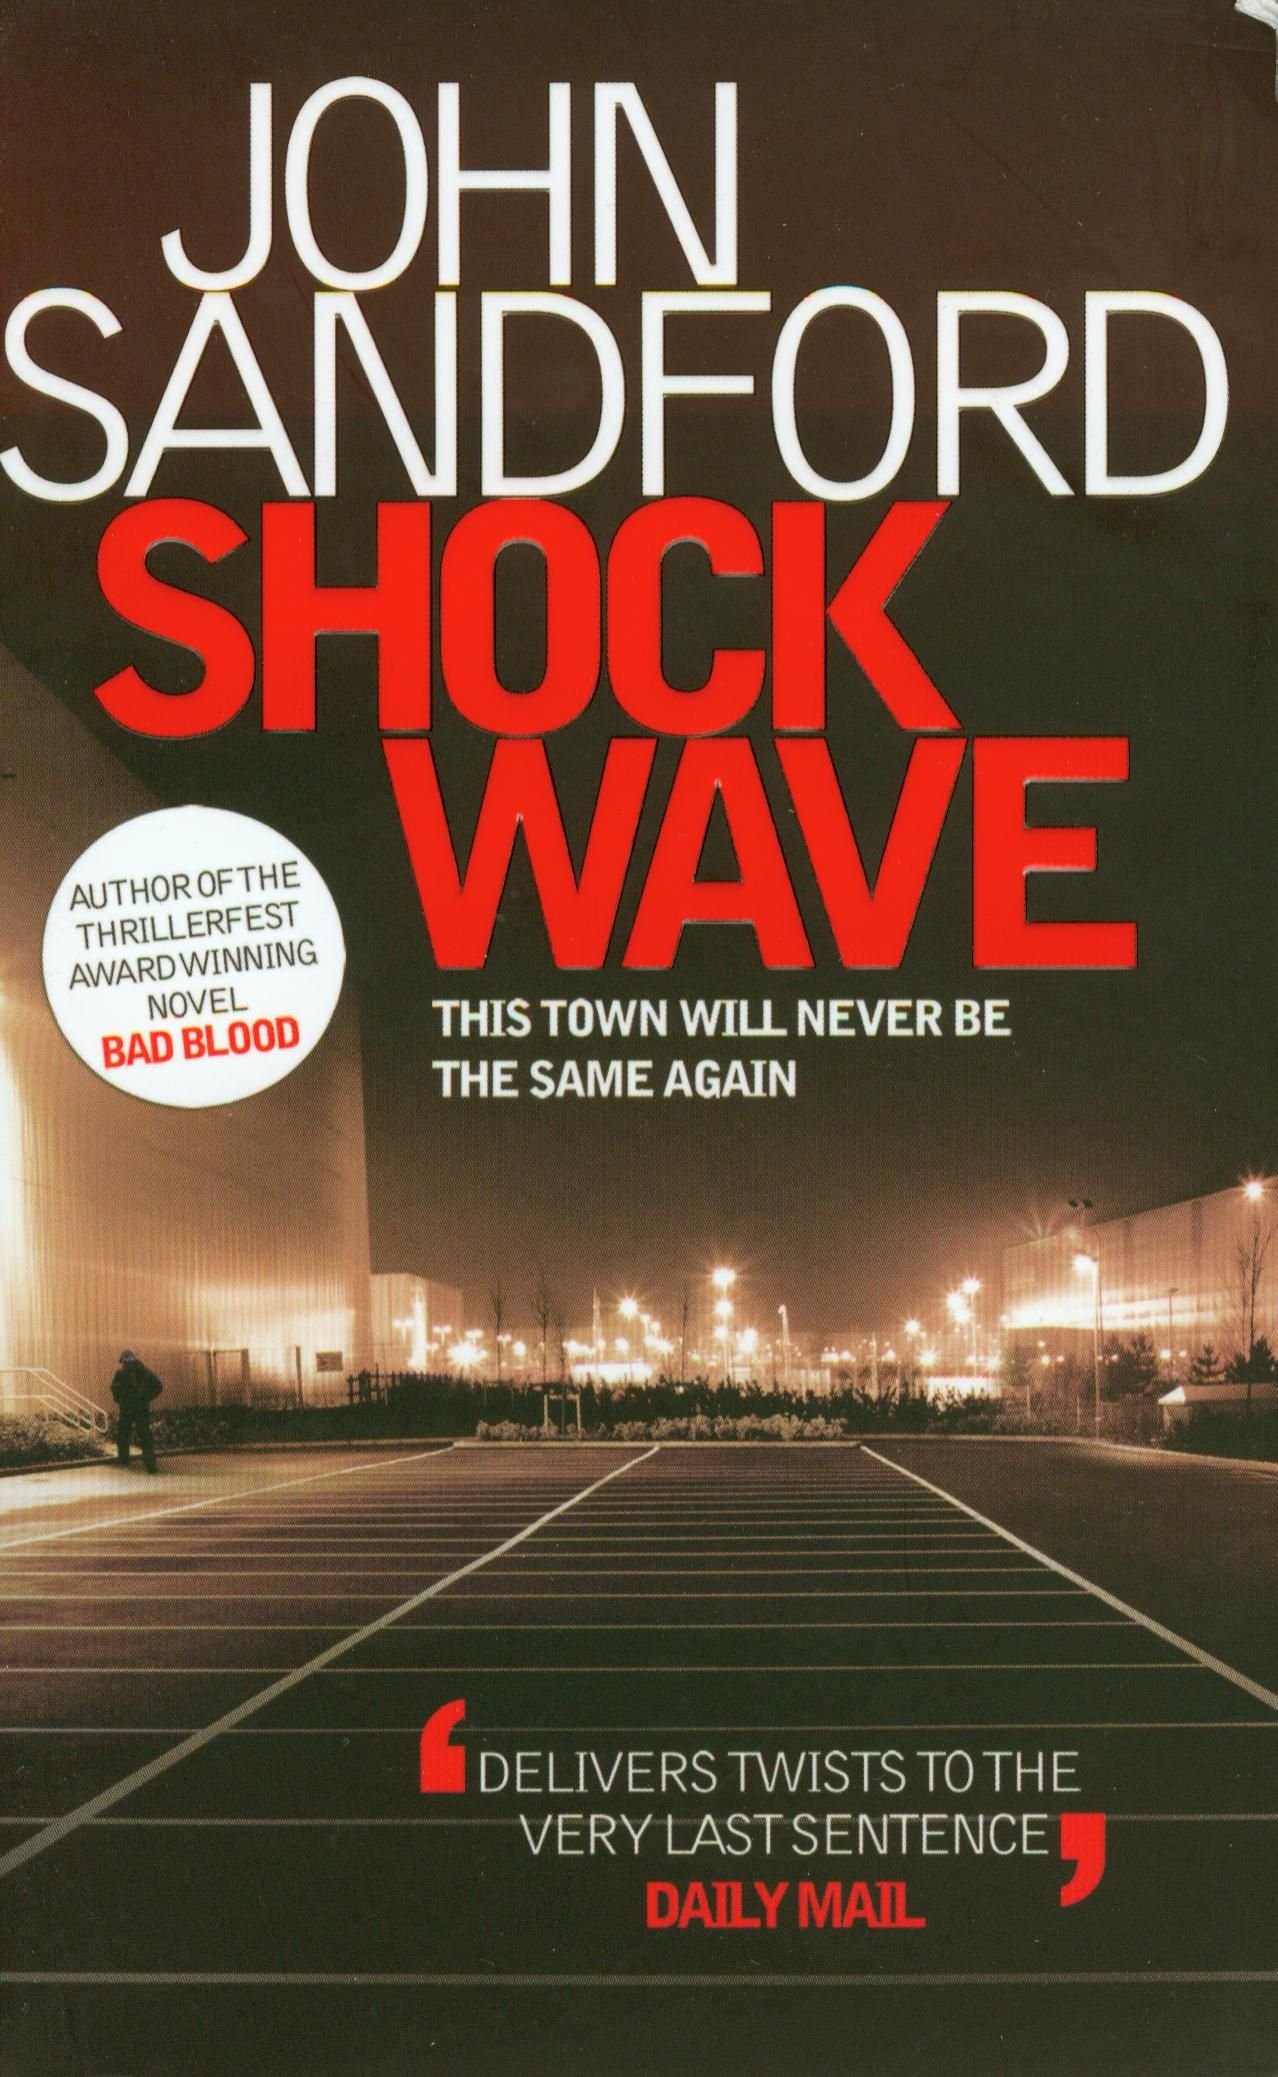 Book Cover of Shock Wave